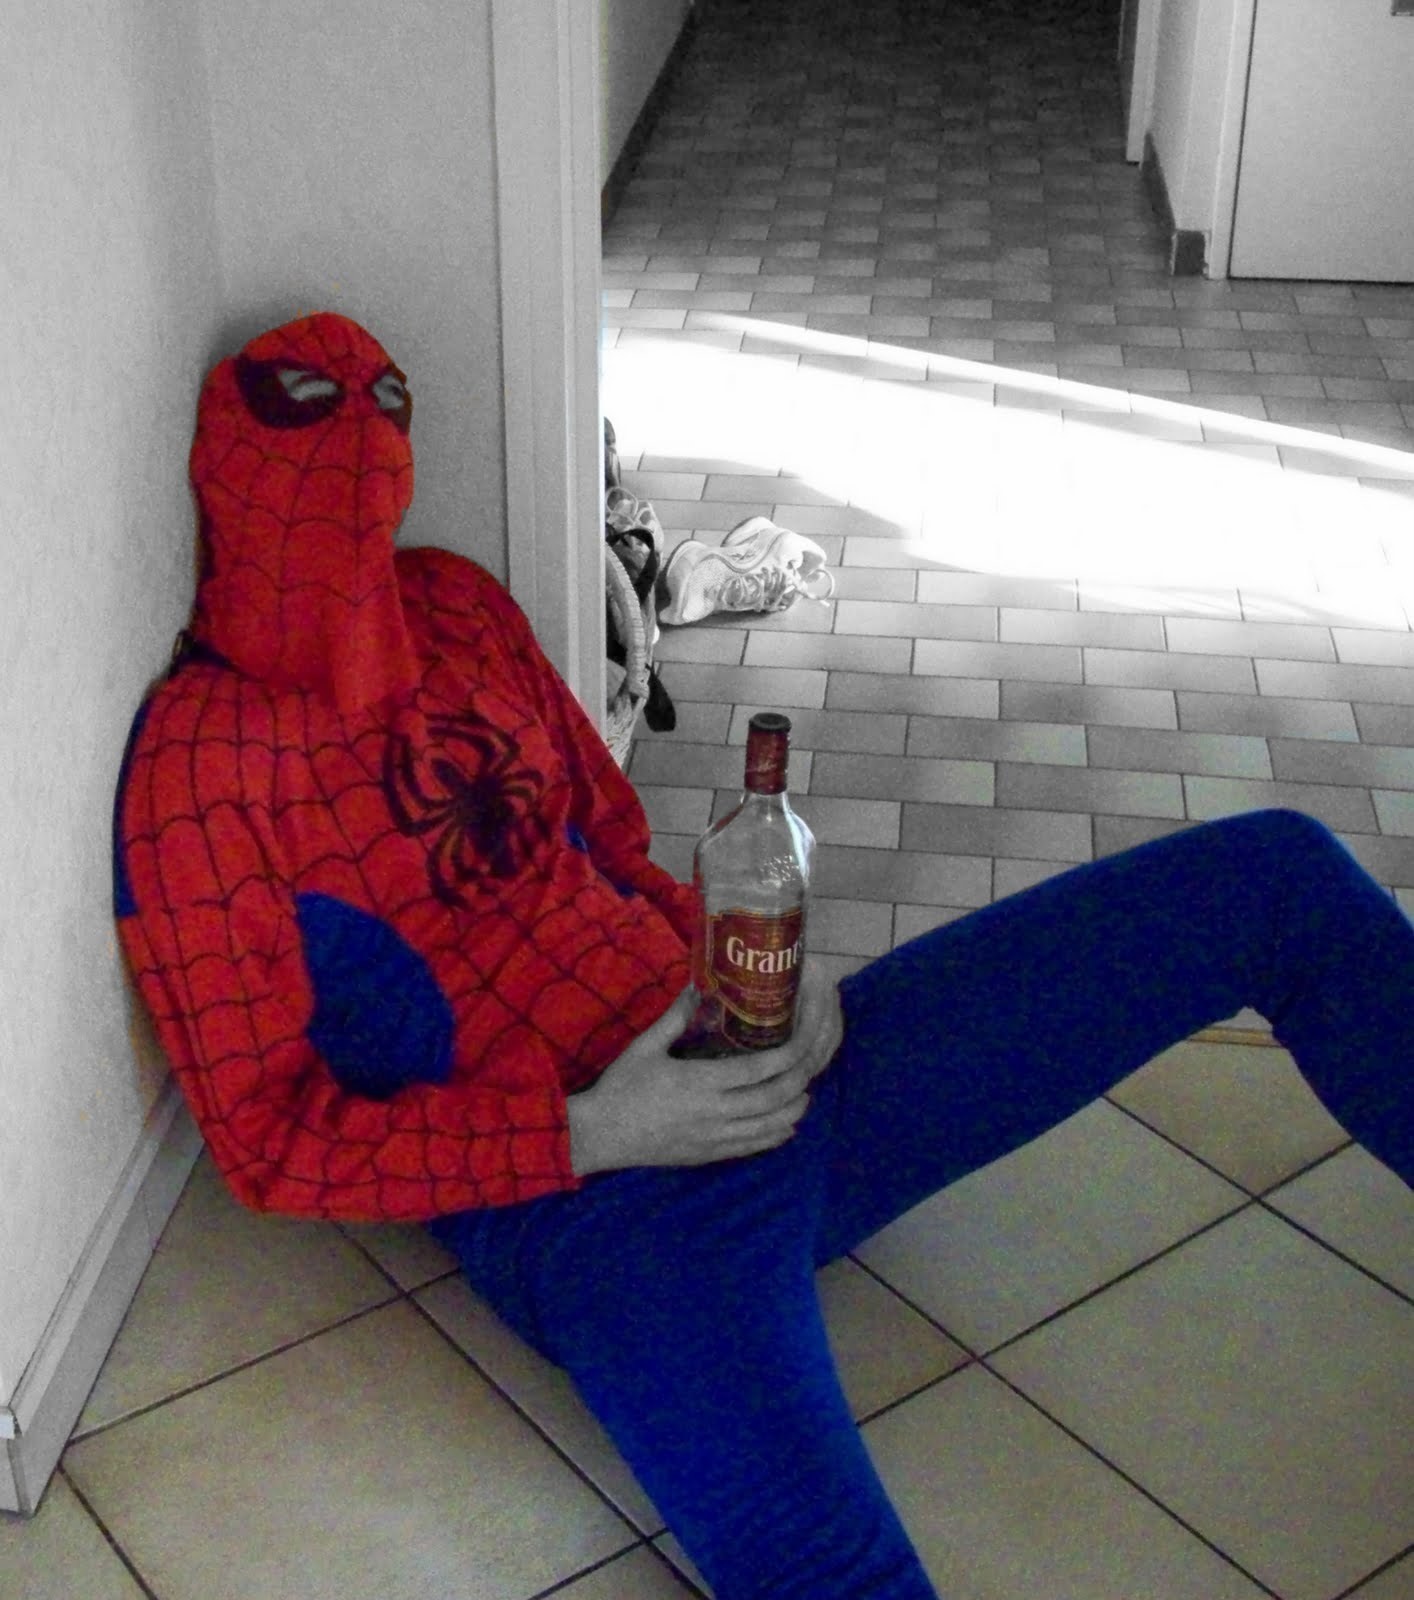 And finally, he found this vodka using his spidey-sense.